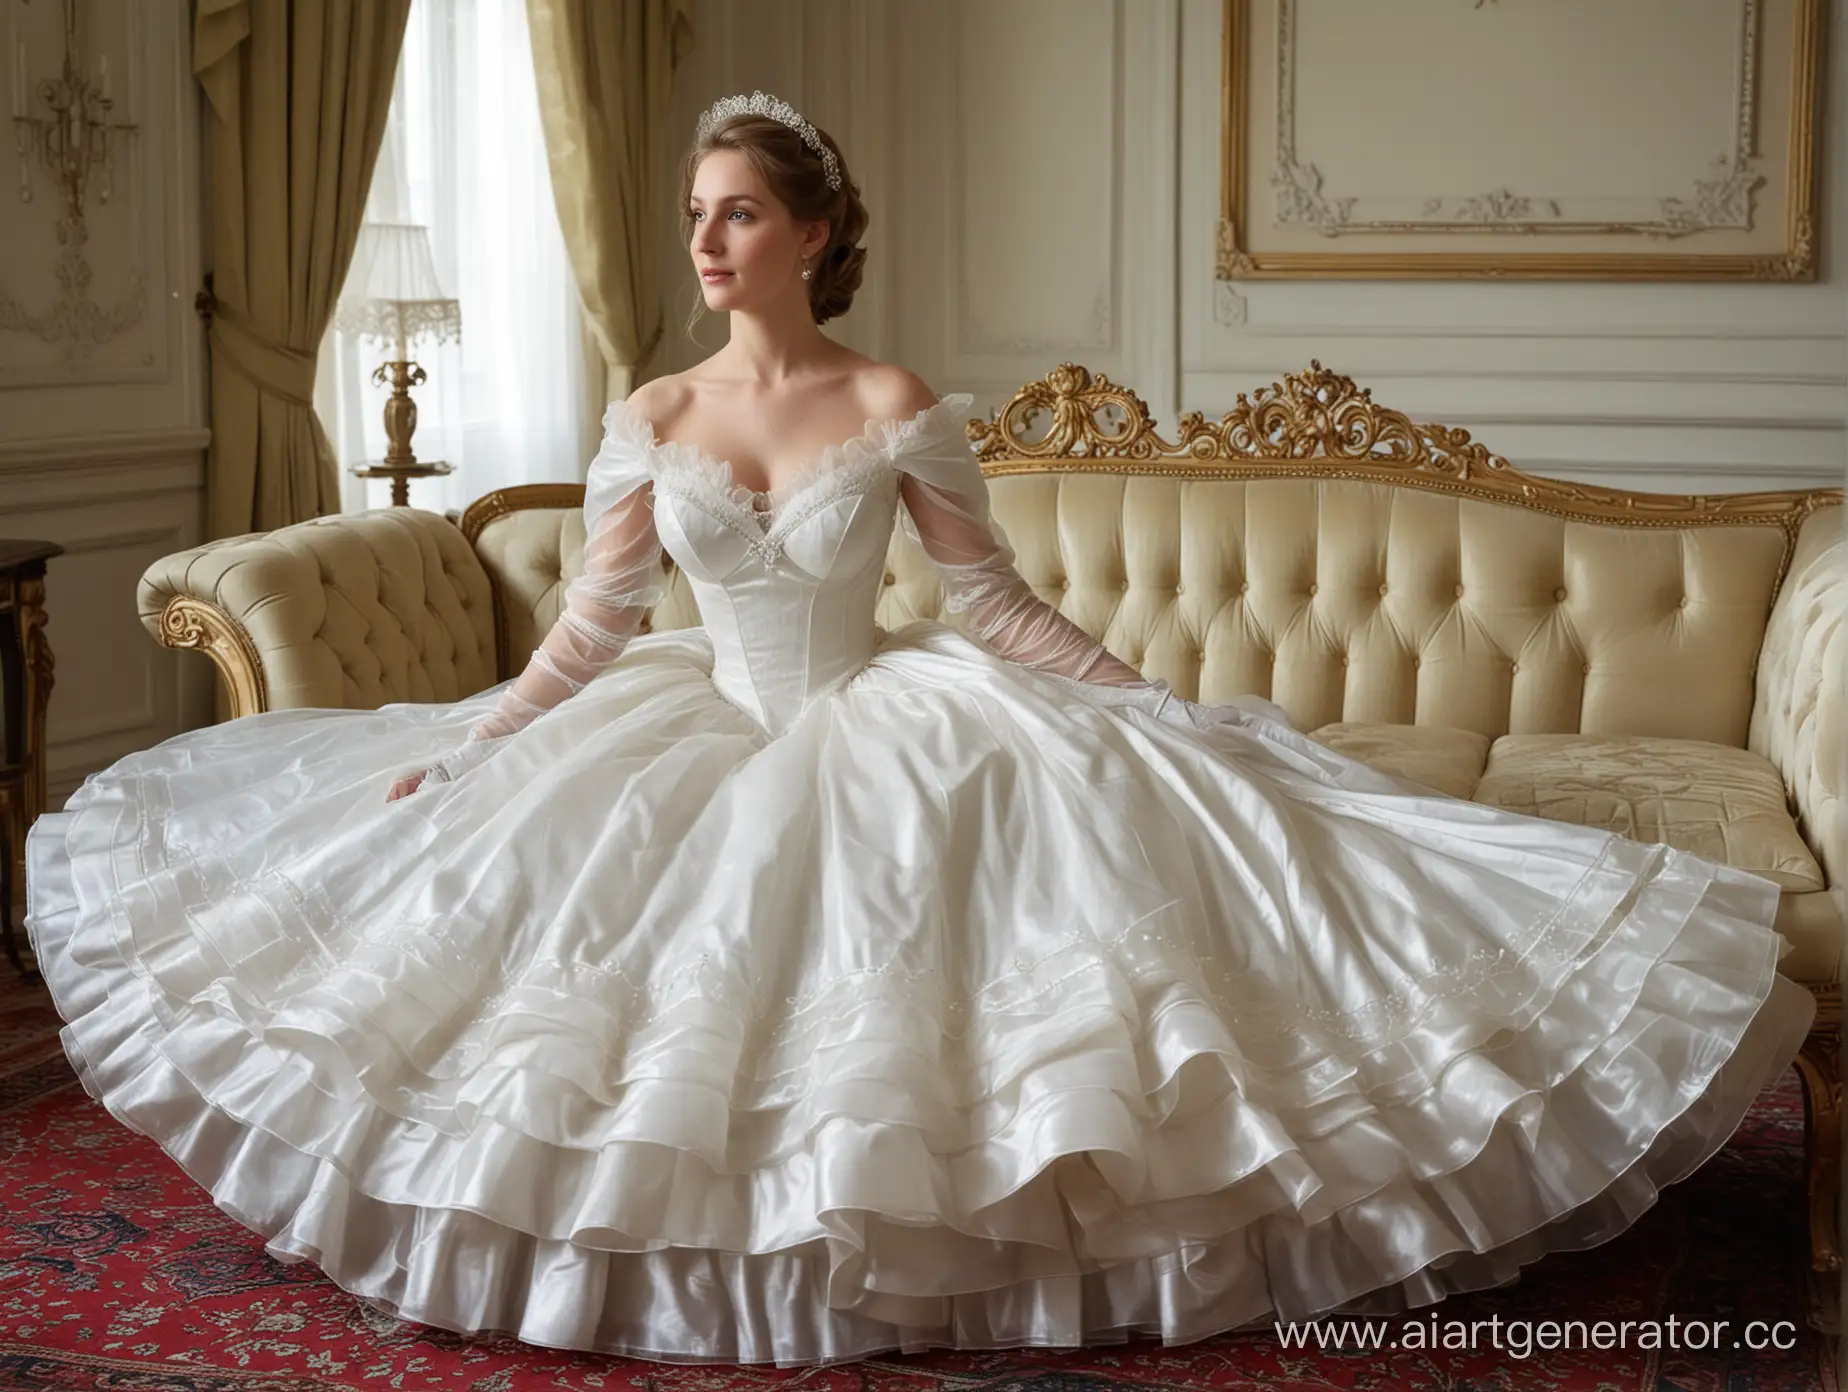 Elegant-25YearOld-Bride-in-Luxurious-Organza-Dress-and-Satin-Gloves-Sitting-in-Palace-Setting